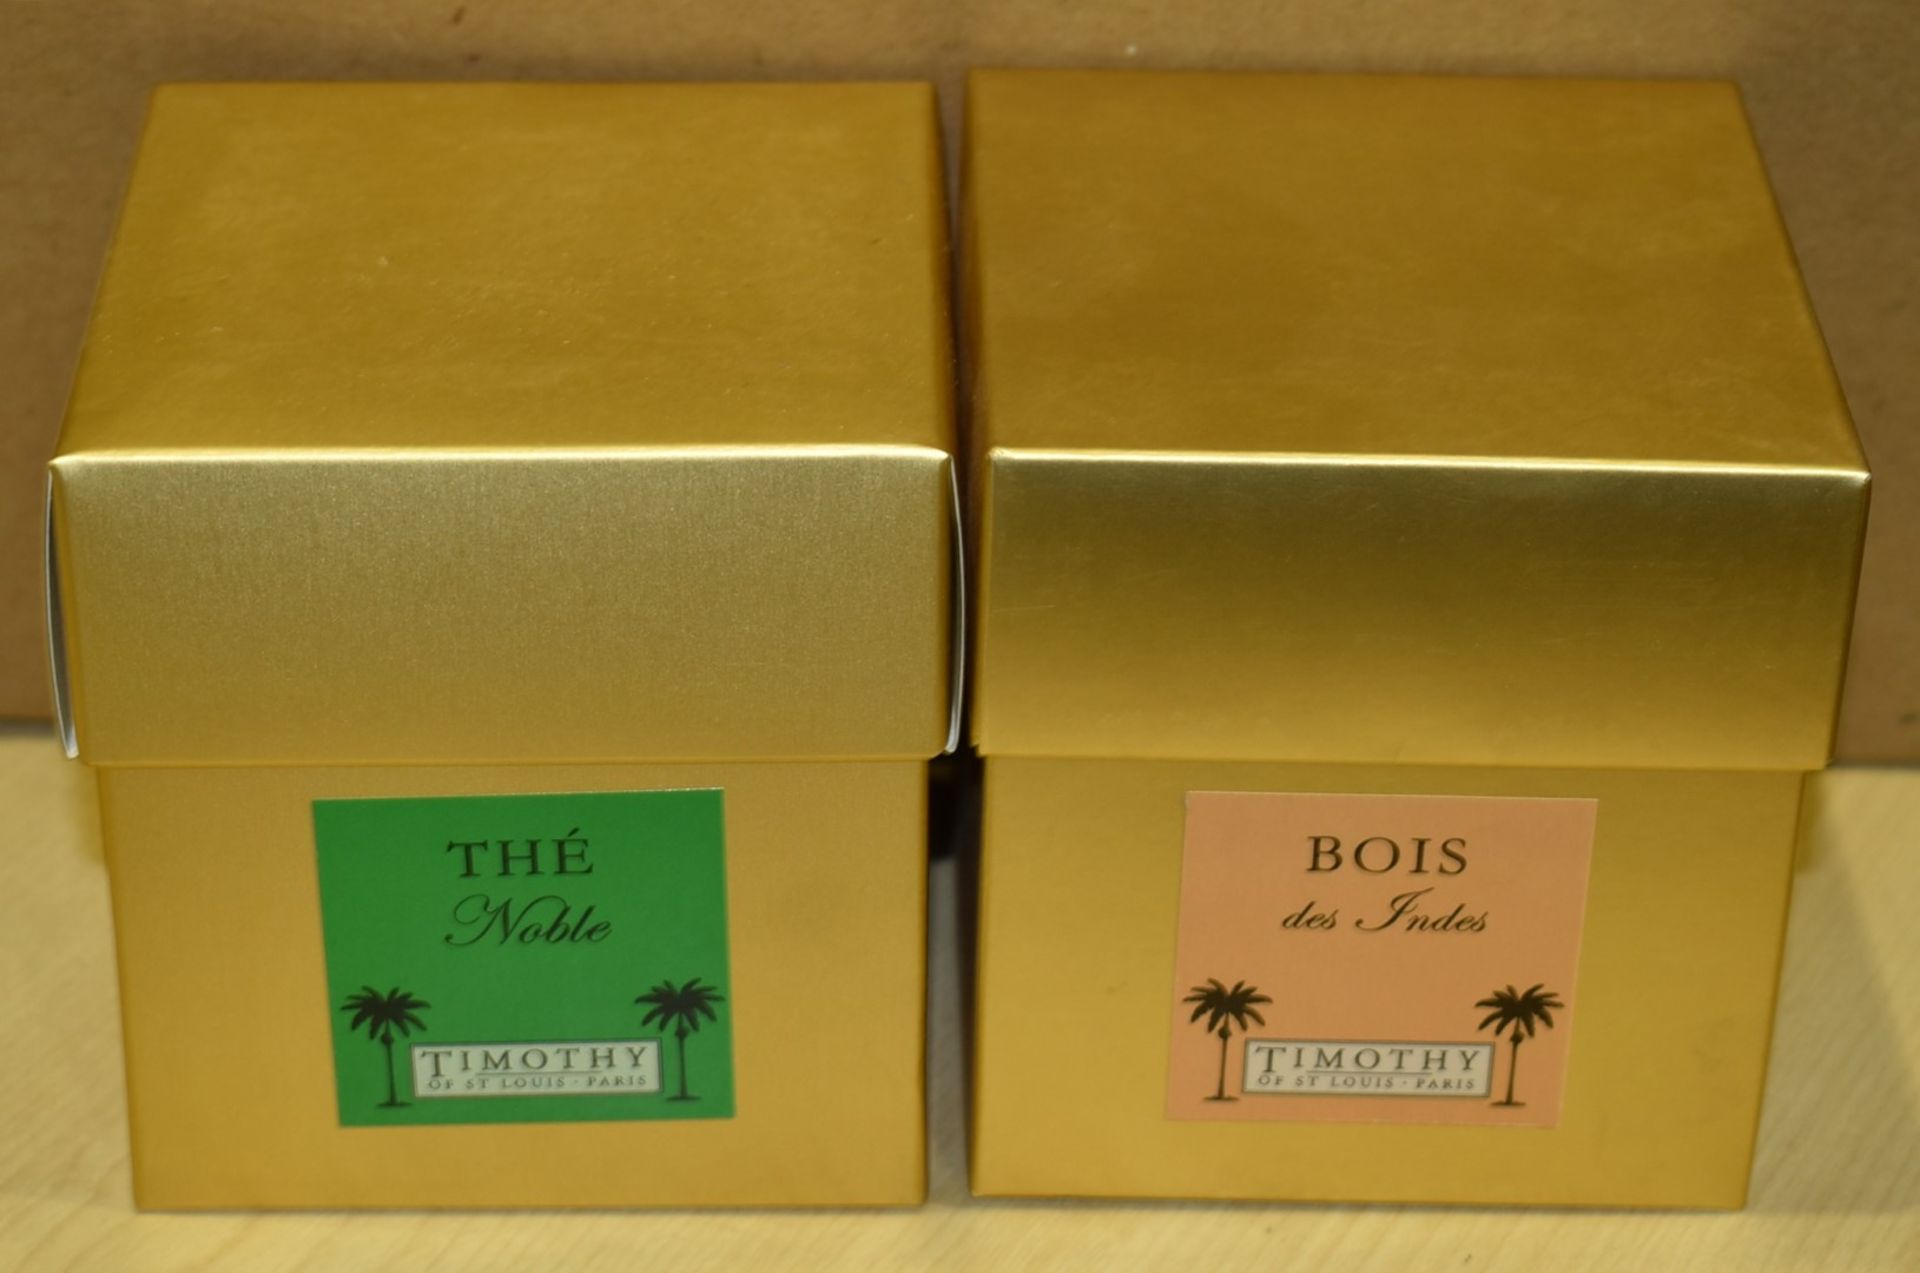 2 x Timothy of St Louis Perfumed Candle - The & Bois - Brand New and Boxed - 150g Scented Candles